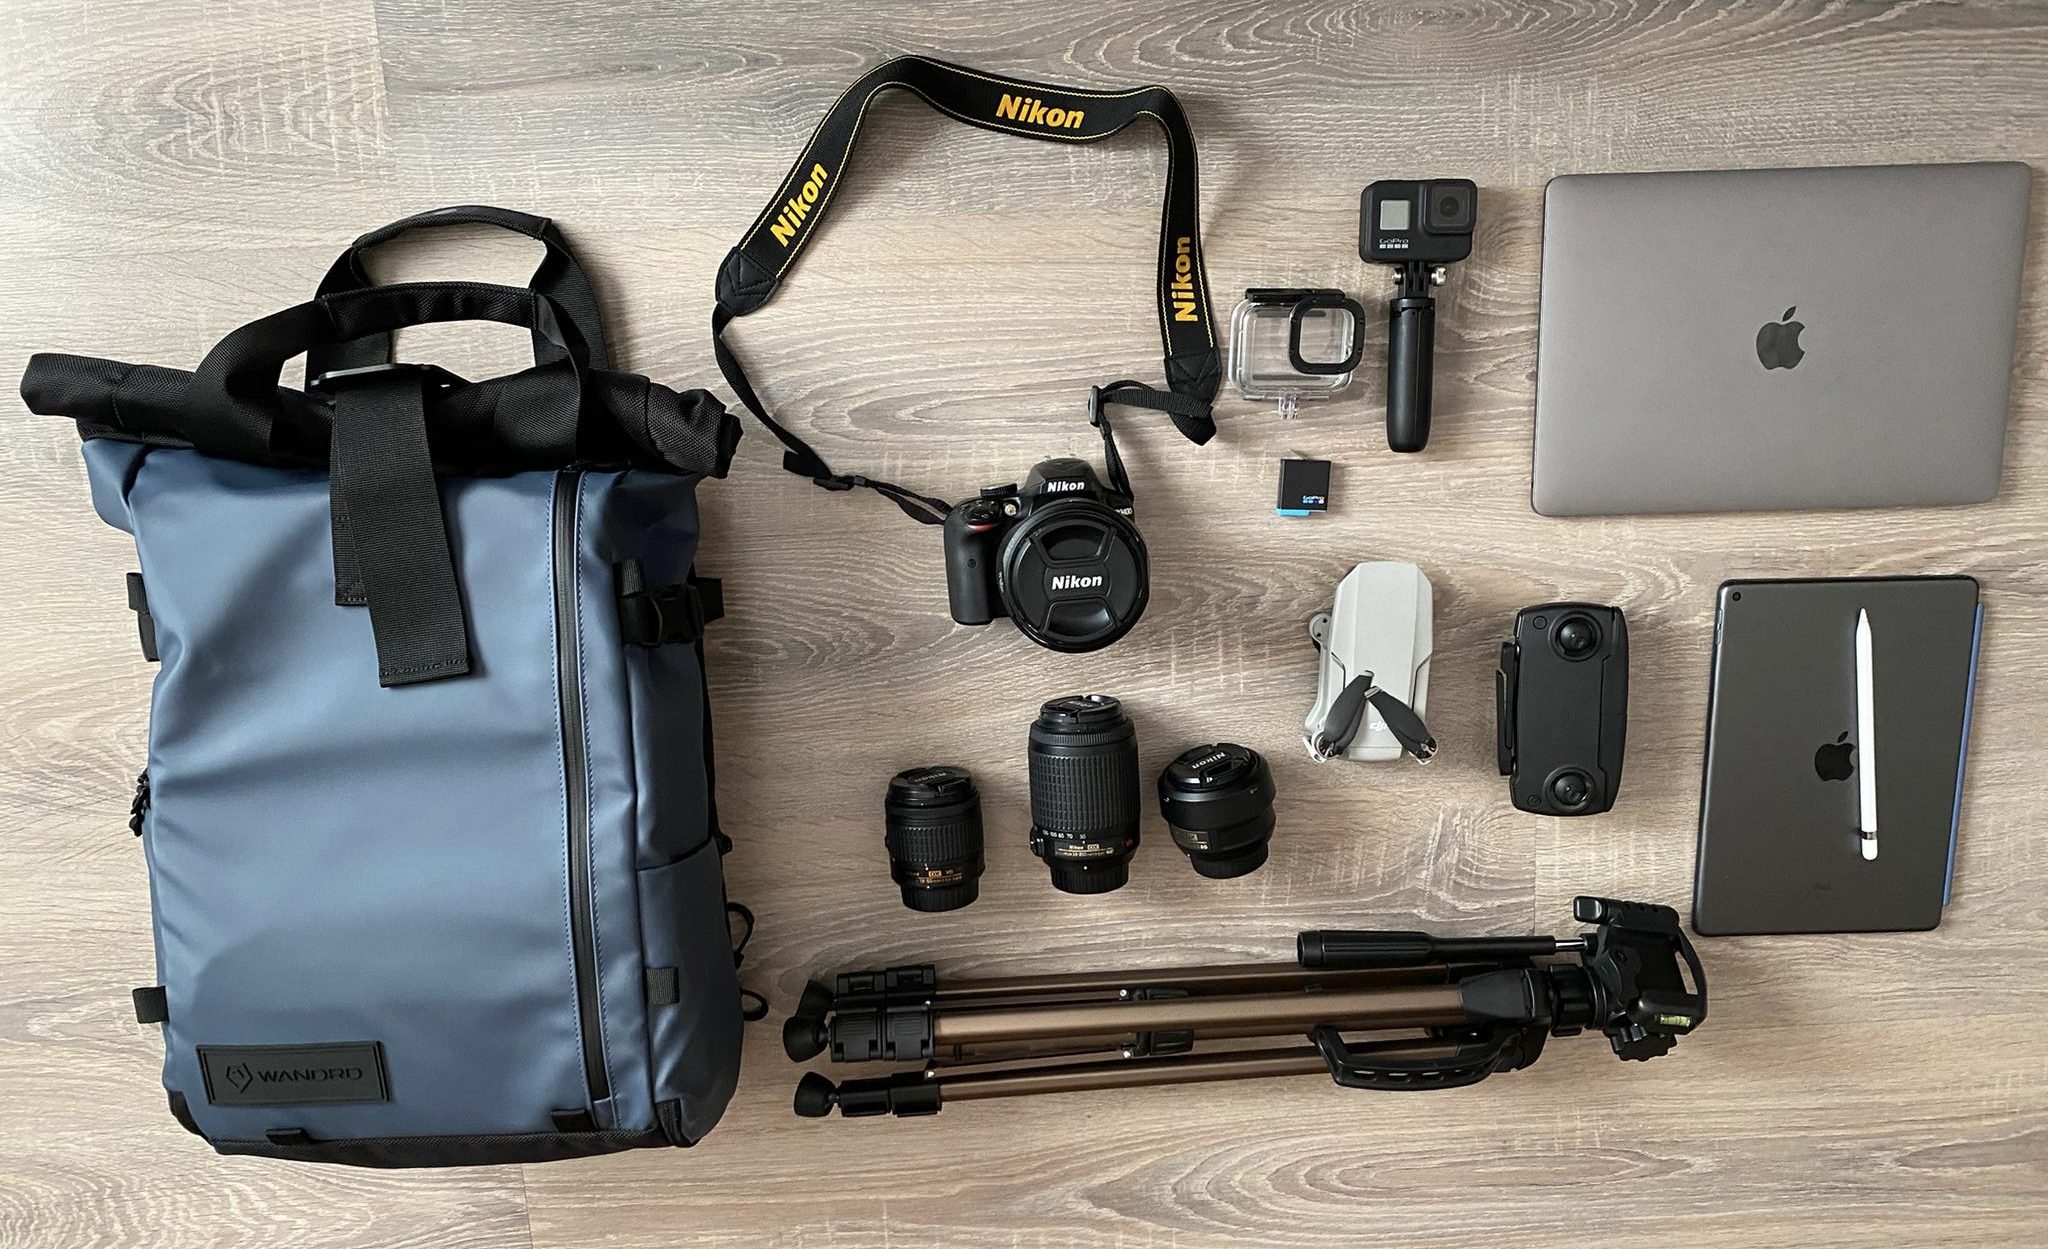 Photography gear with camera, drone, MacBook Pro 